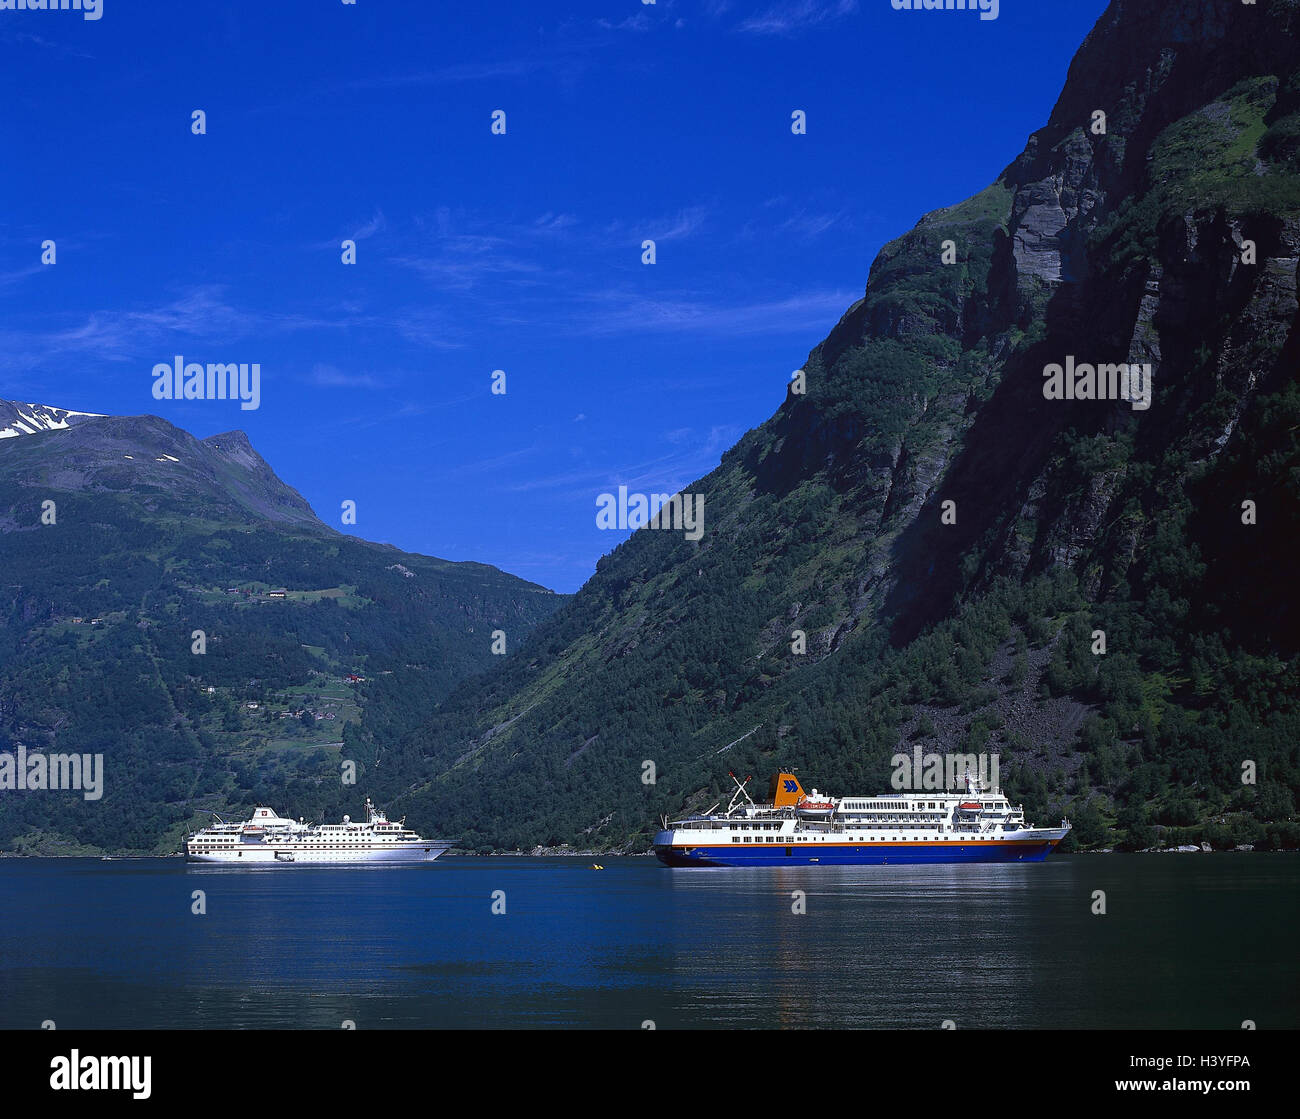 Norway, Geiranger fjord, cruise ships Geiranger, fjord, bay, bile coast, ships, passenger liners, navigation, place of interest, mountain landscape, lake, water, Stock Photo